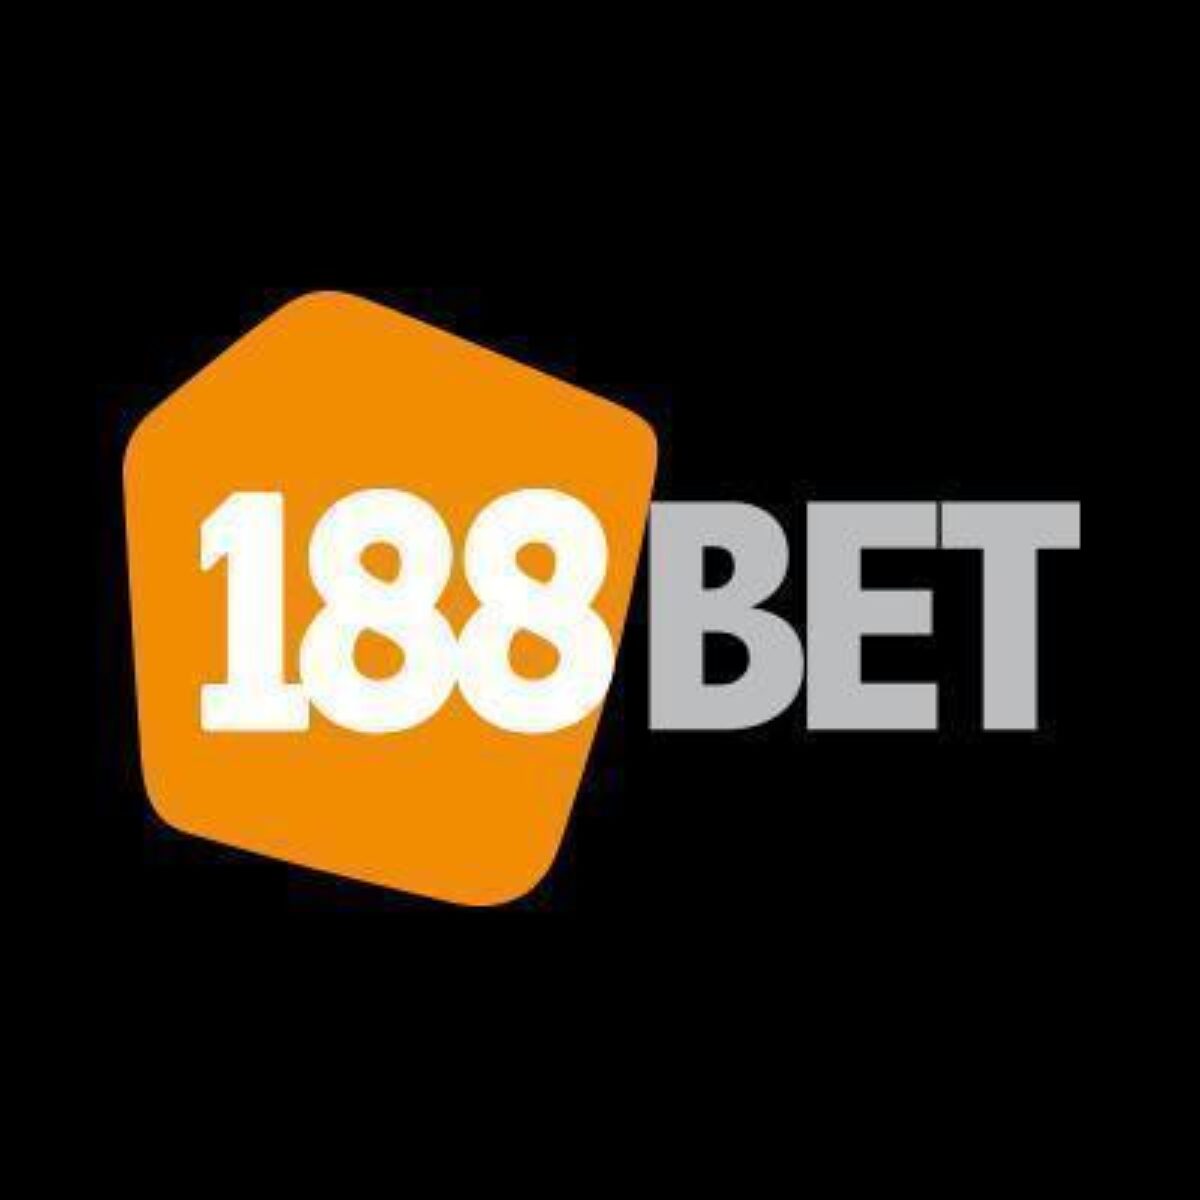 Chat 188bet live 188BET SKTB